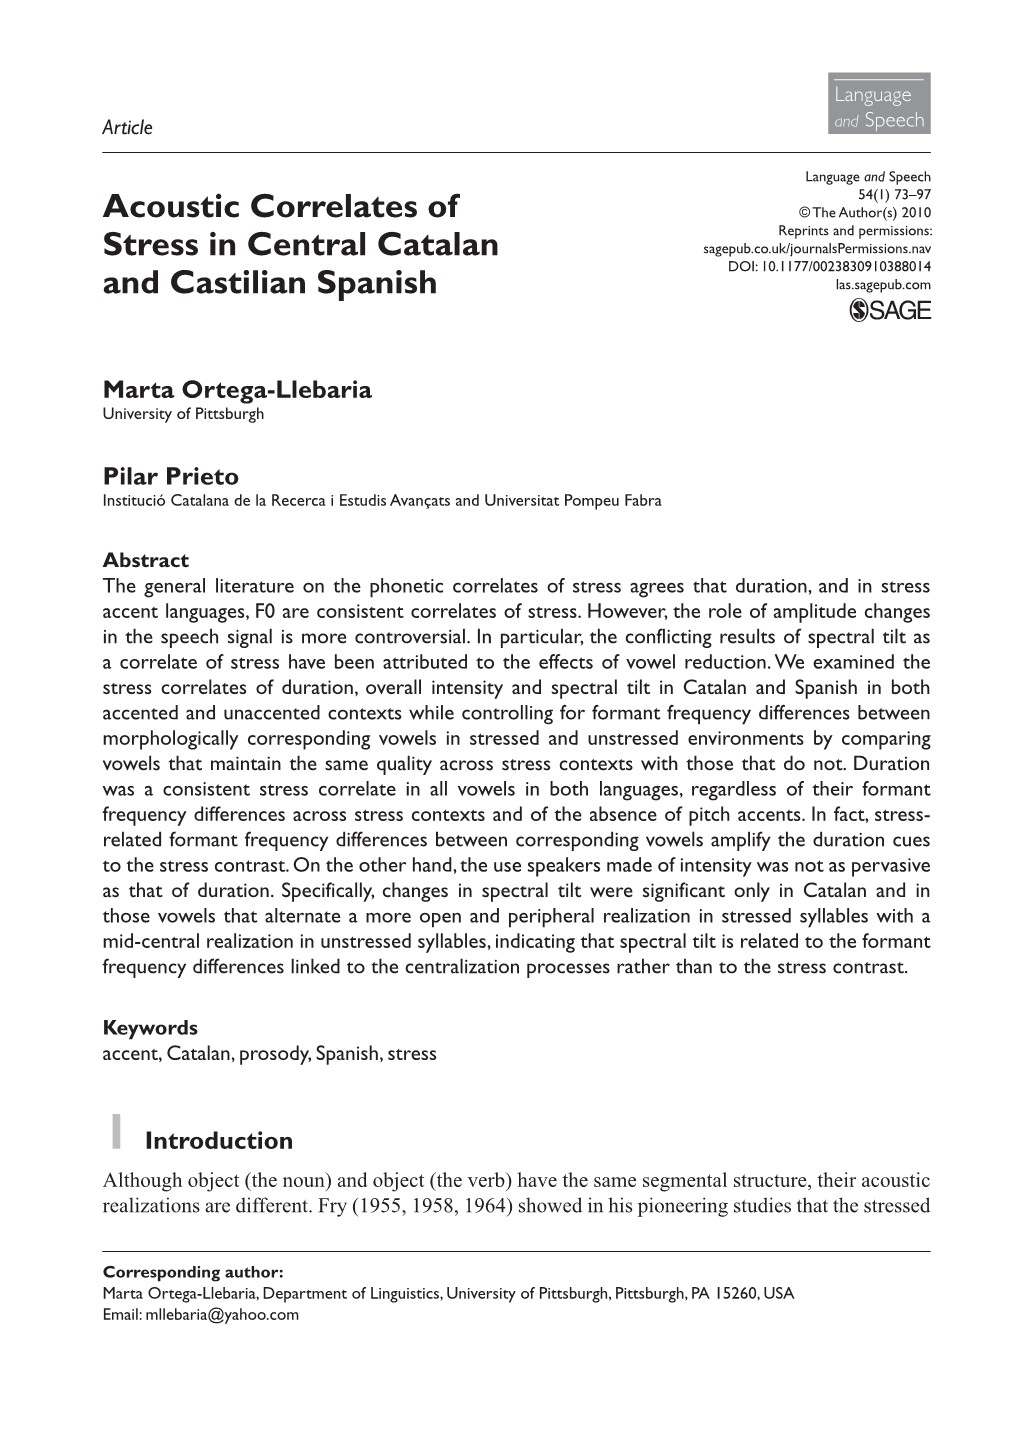 Acoustic Correlates of Stress in Central Catalan and Castilian